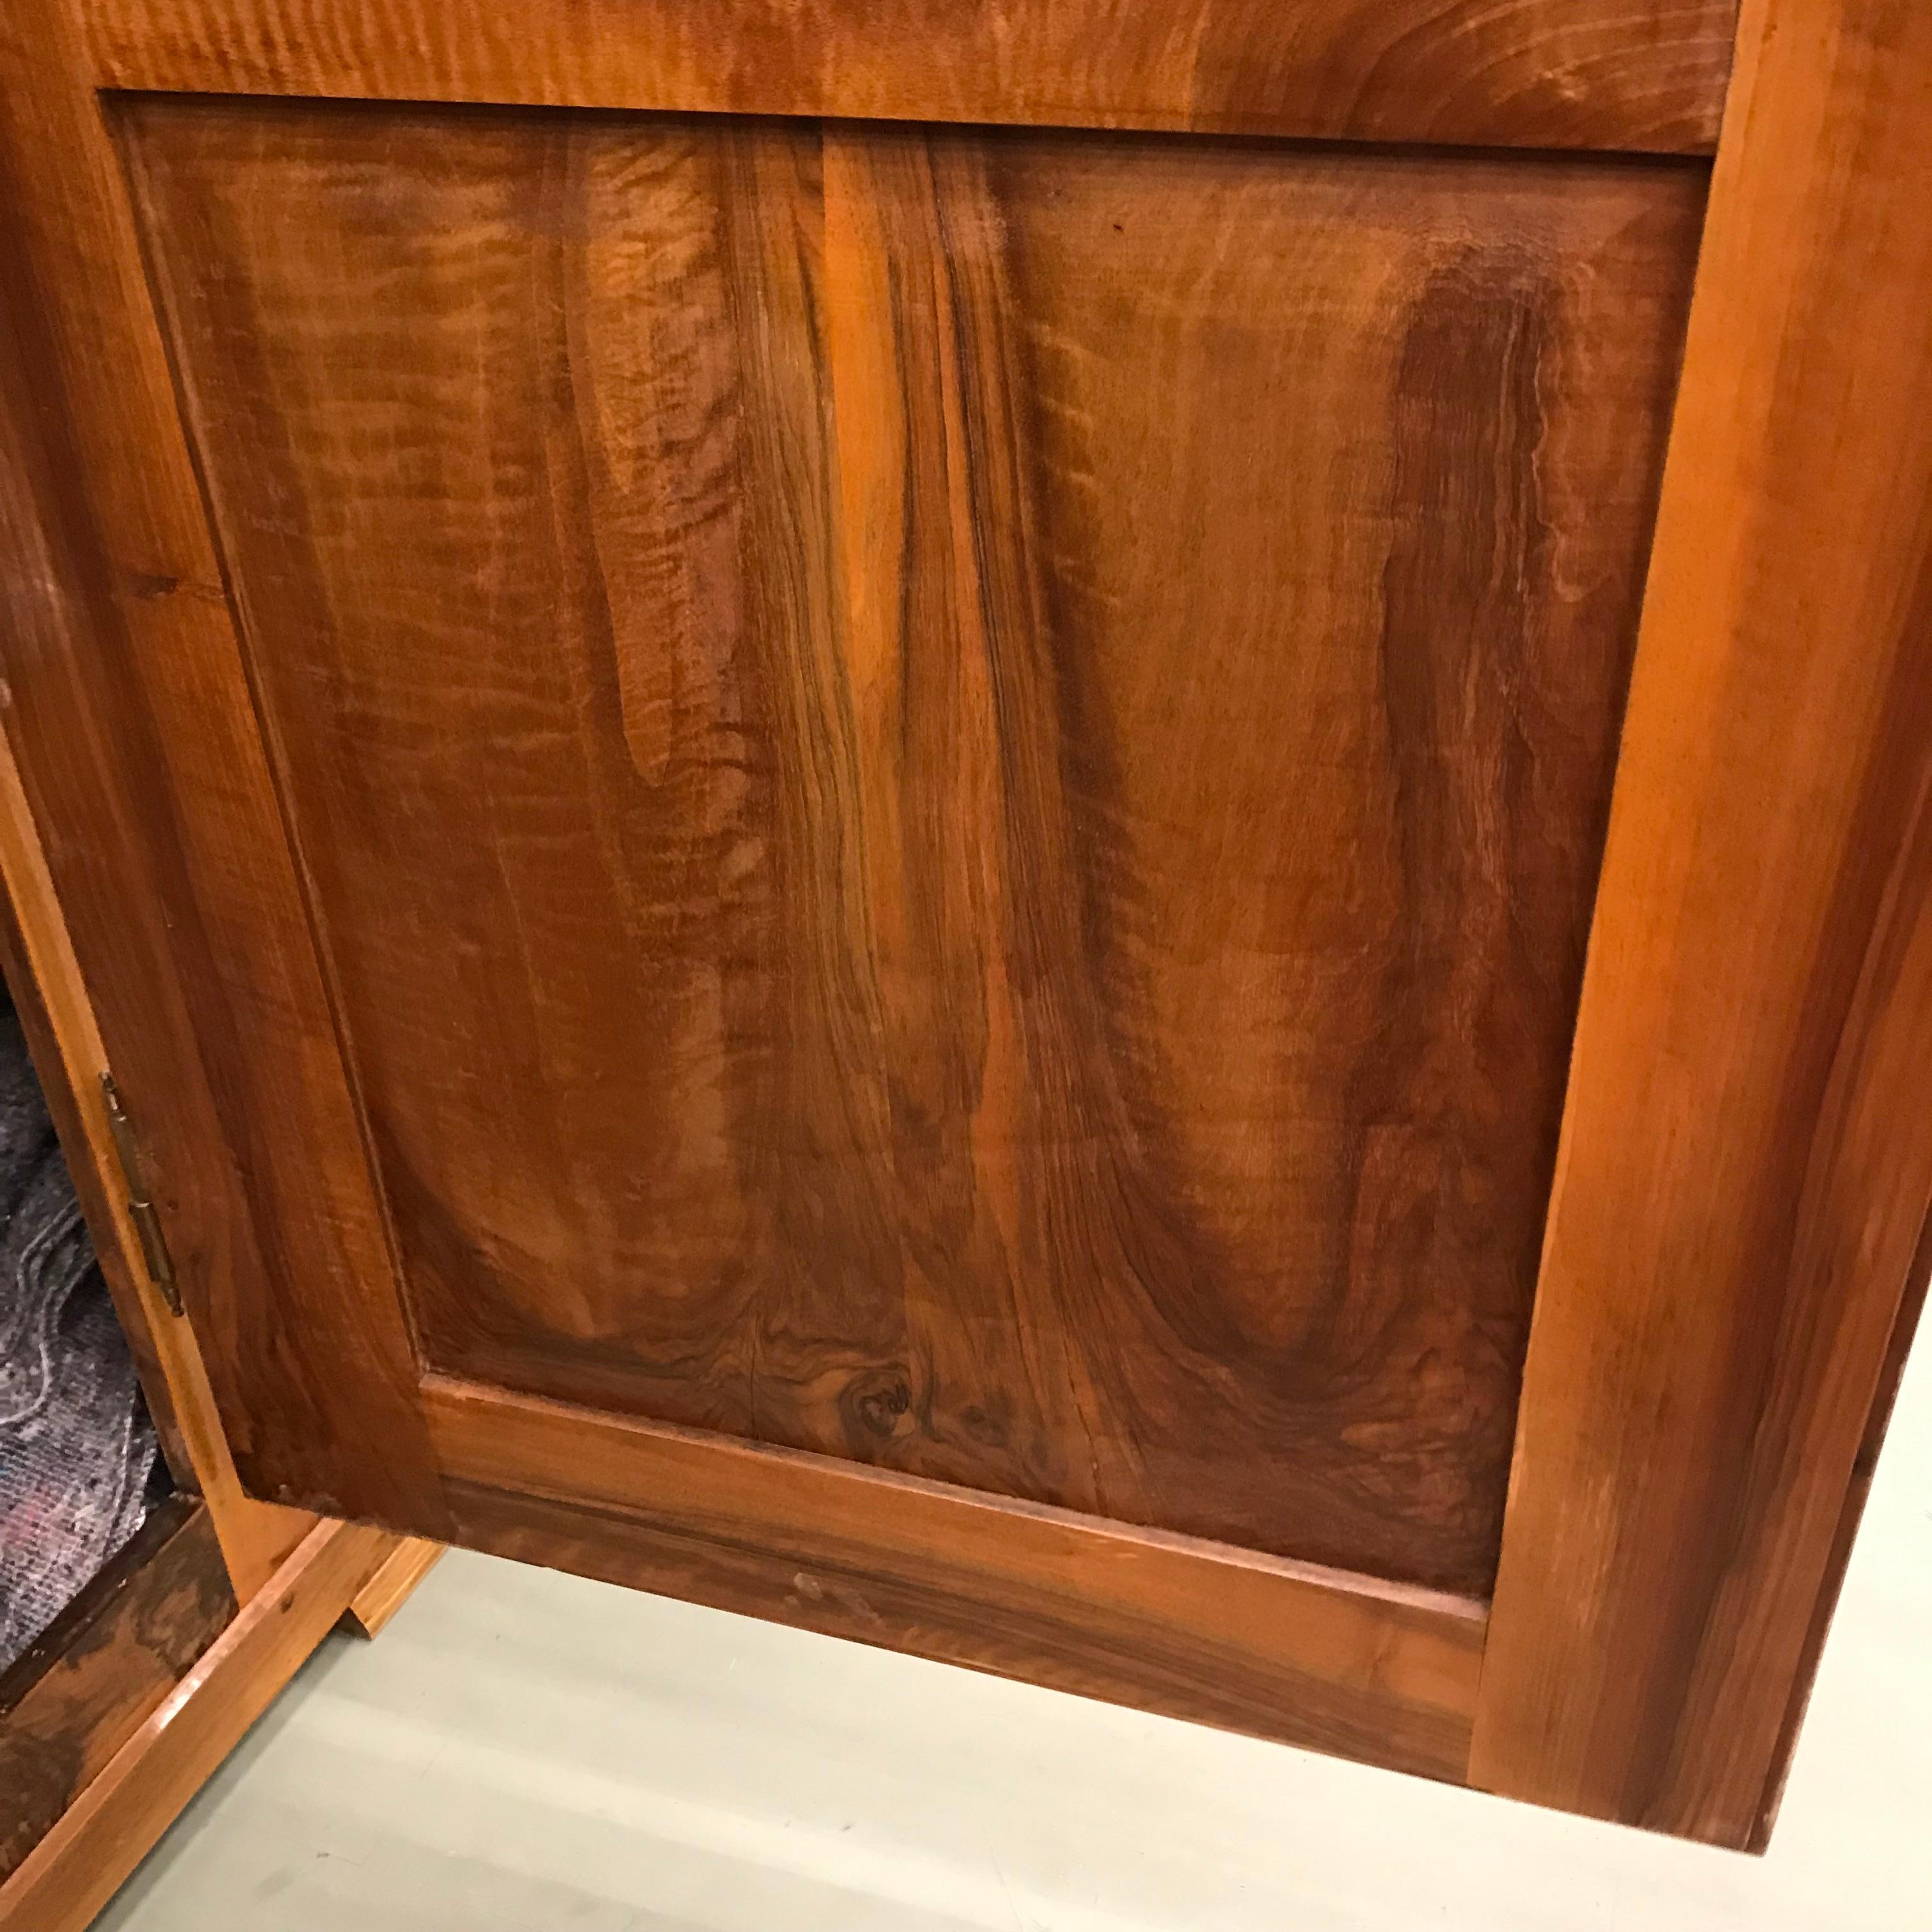 Biedermeier wardrobe, South German 1820, walnut veneer. Classic Biedermeier design with beautiful veneer grain. the cabinet is refinished and French polished. It will be shipped from Germany, shipping costs to Boston are included.